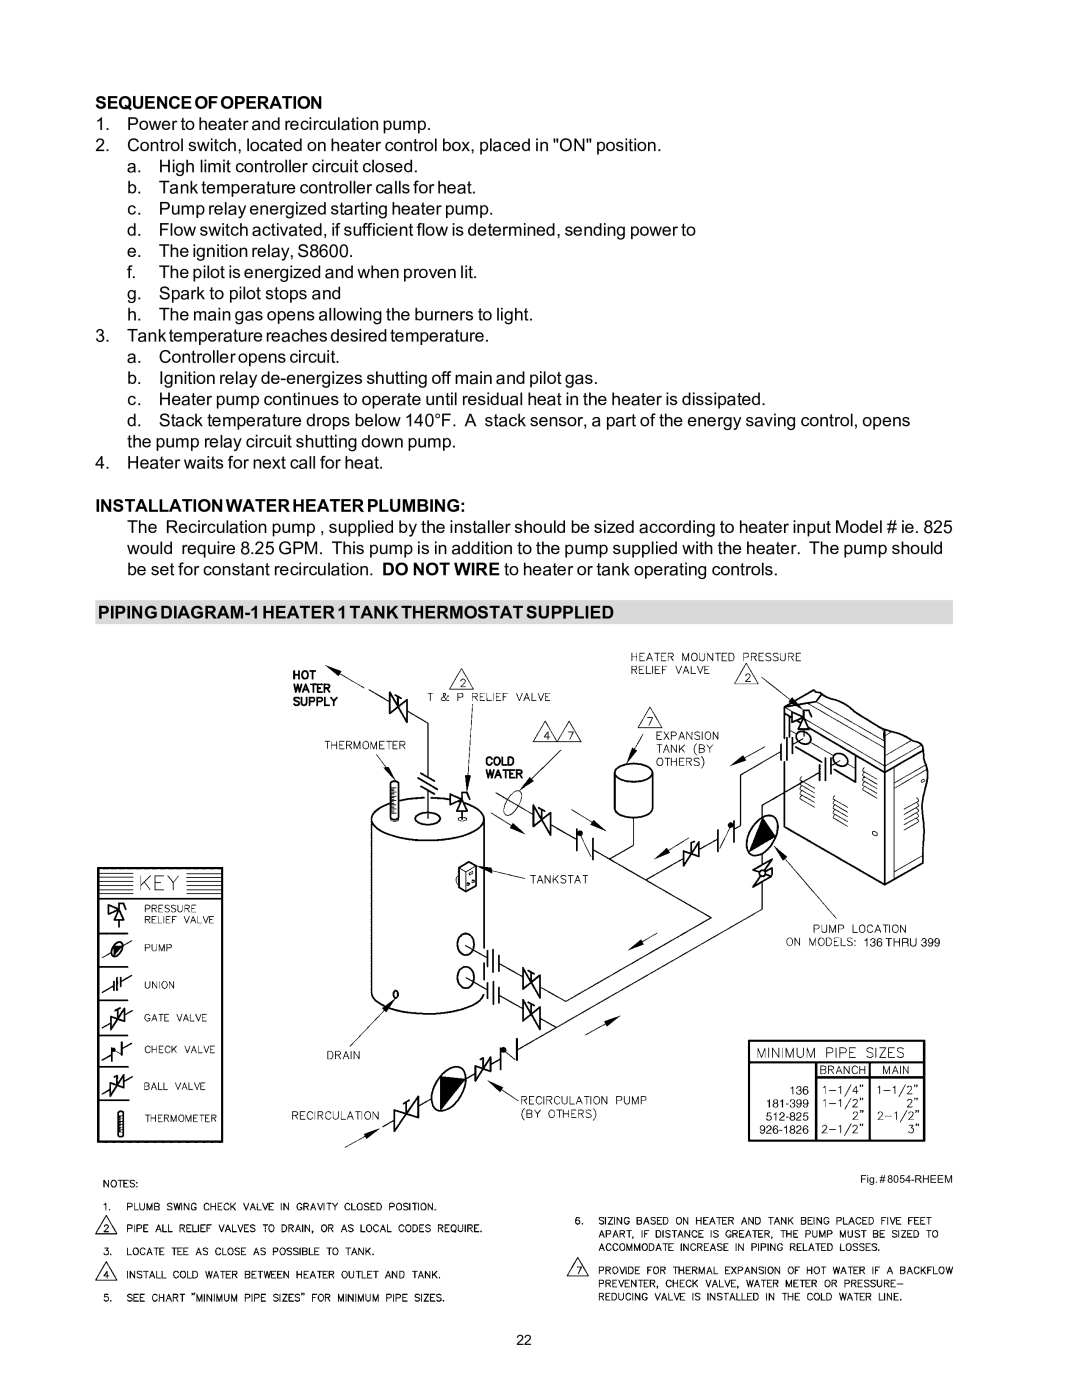 Rheem 136-1826 Sequenceofoperation, Installation Water Heater Plumbing, Piping DIAGRAM-1 Heater 1 Tank Thermostat Supplied 